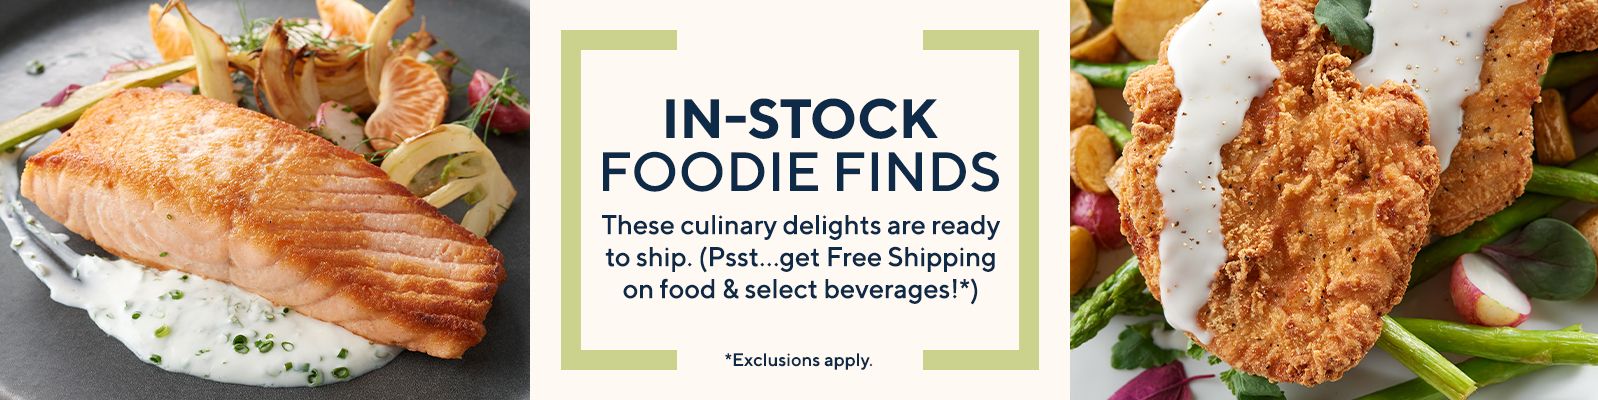 In-Stock Foodie Finds These culinary delights are ready to ship. (Psst…get Free Shipping on food & select beverages!*)  Exclusions apply.